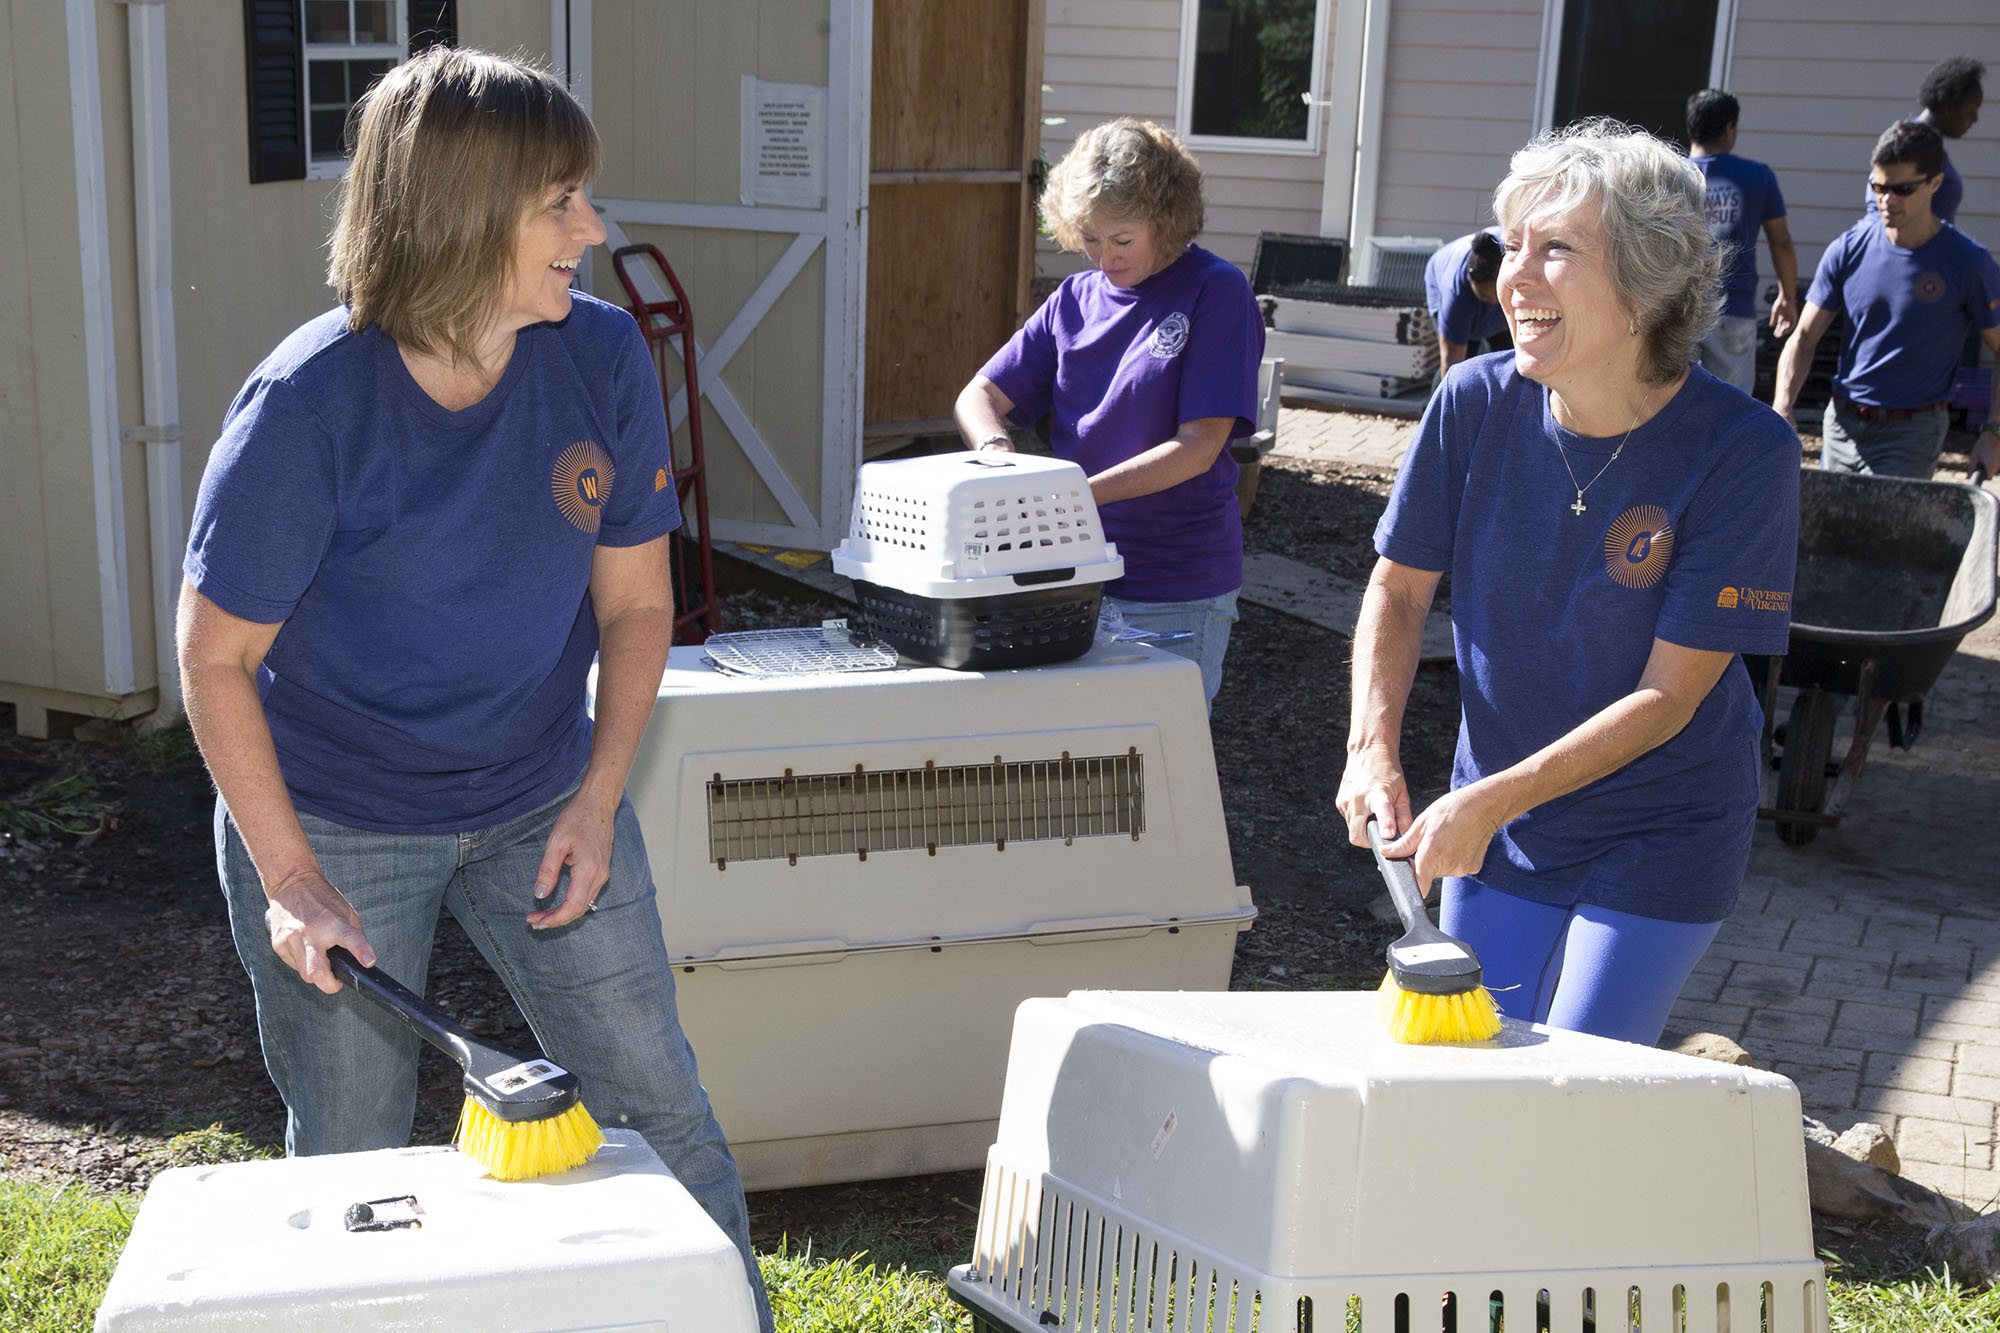 Darden School of Business employees cleaned cat and dog carrier boxes at the SPCA. Photos by Dan Addison / University Communications